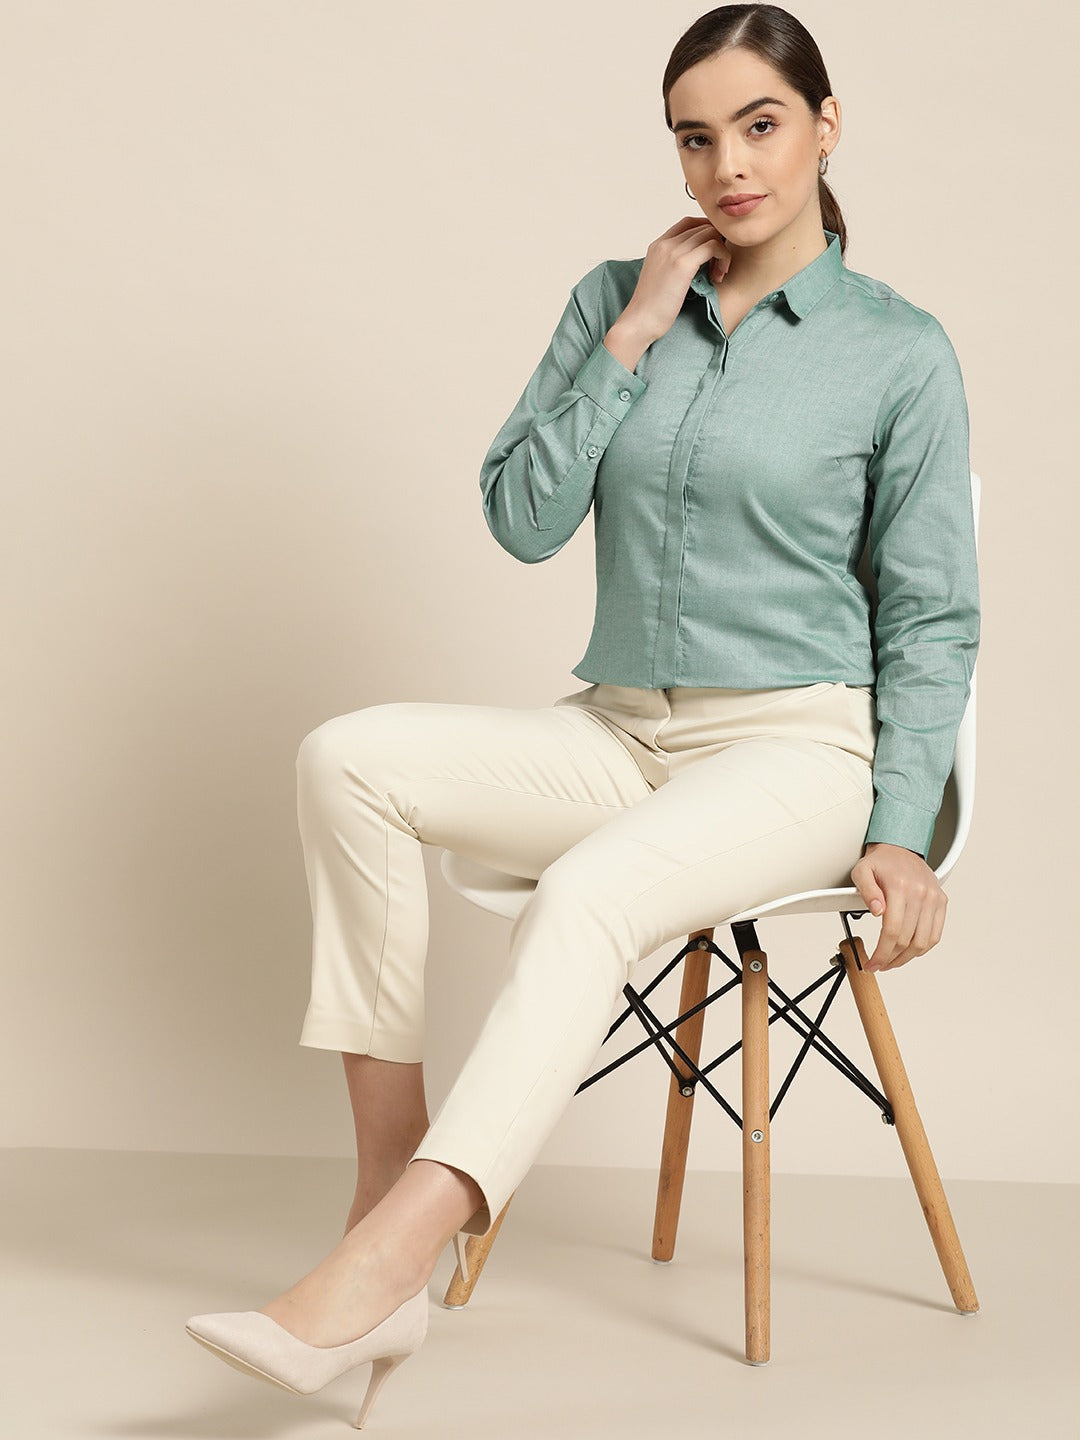 Women Green Solid Pure Cotton Slim Fit Formal Shirt